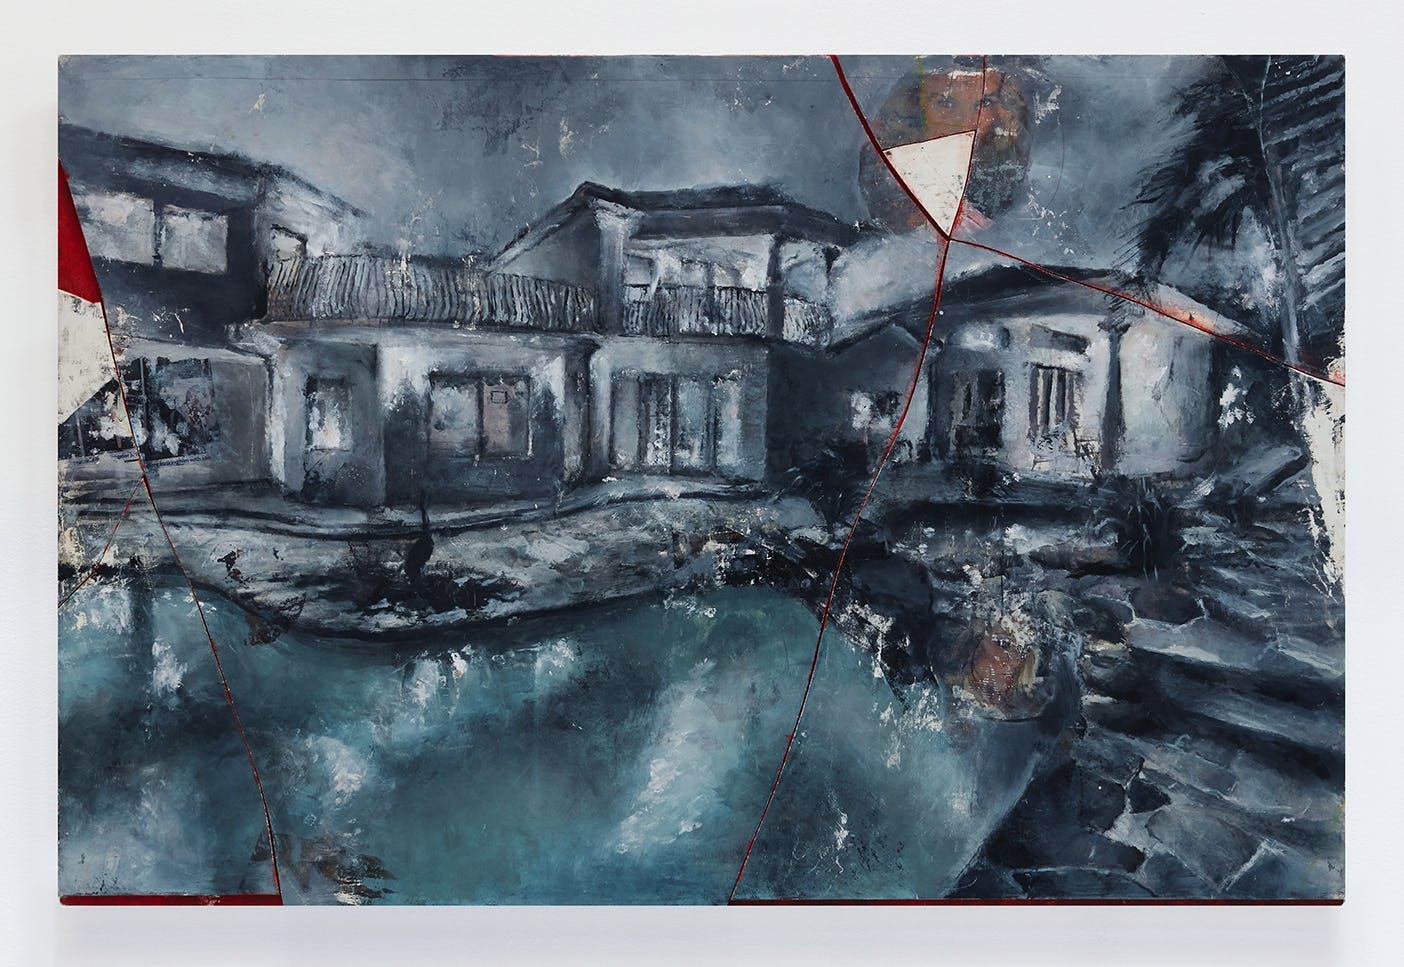 Catherine Mulligan
Mansion (2021)
Oil and photo transfers on board
24h x 36w inches (60.96h x 91.44w cm)